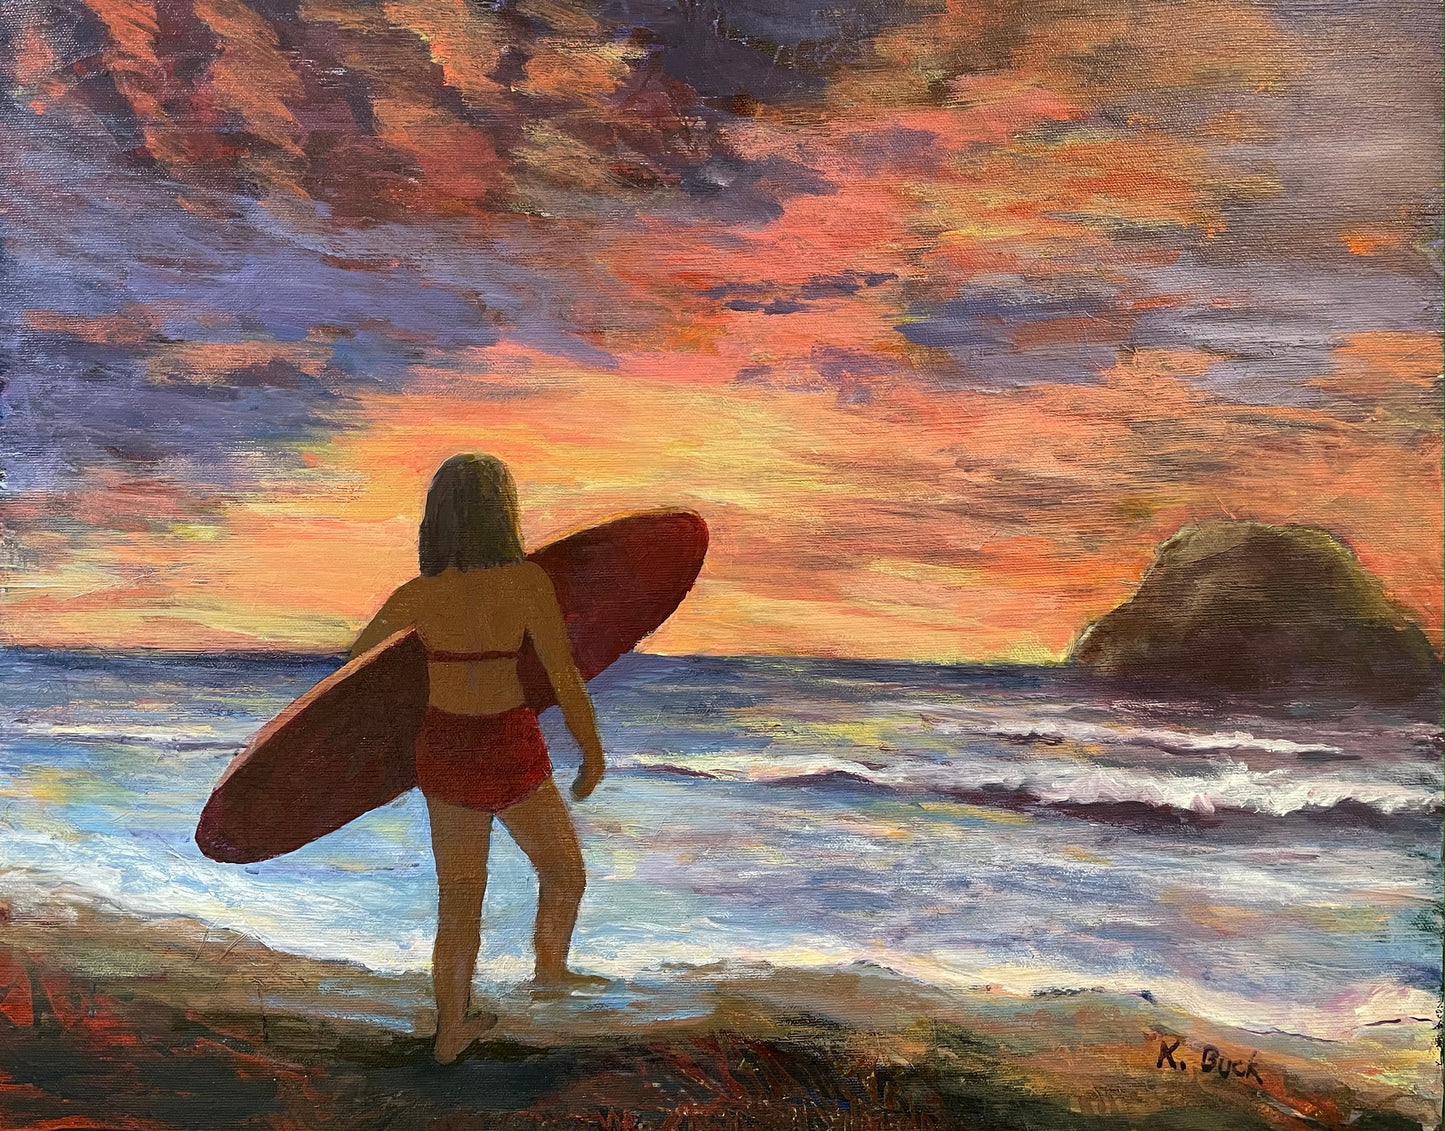 "Surfing at Sunset"